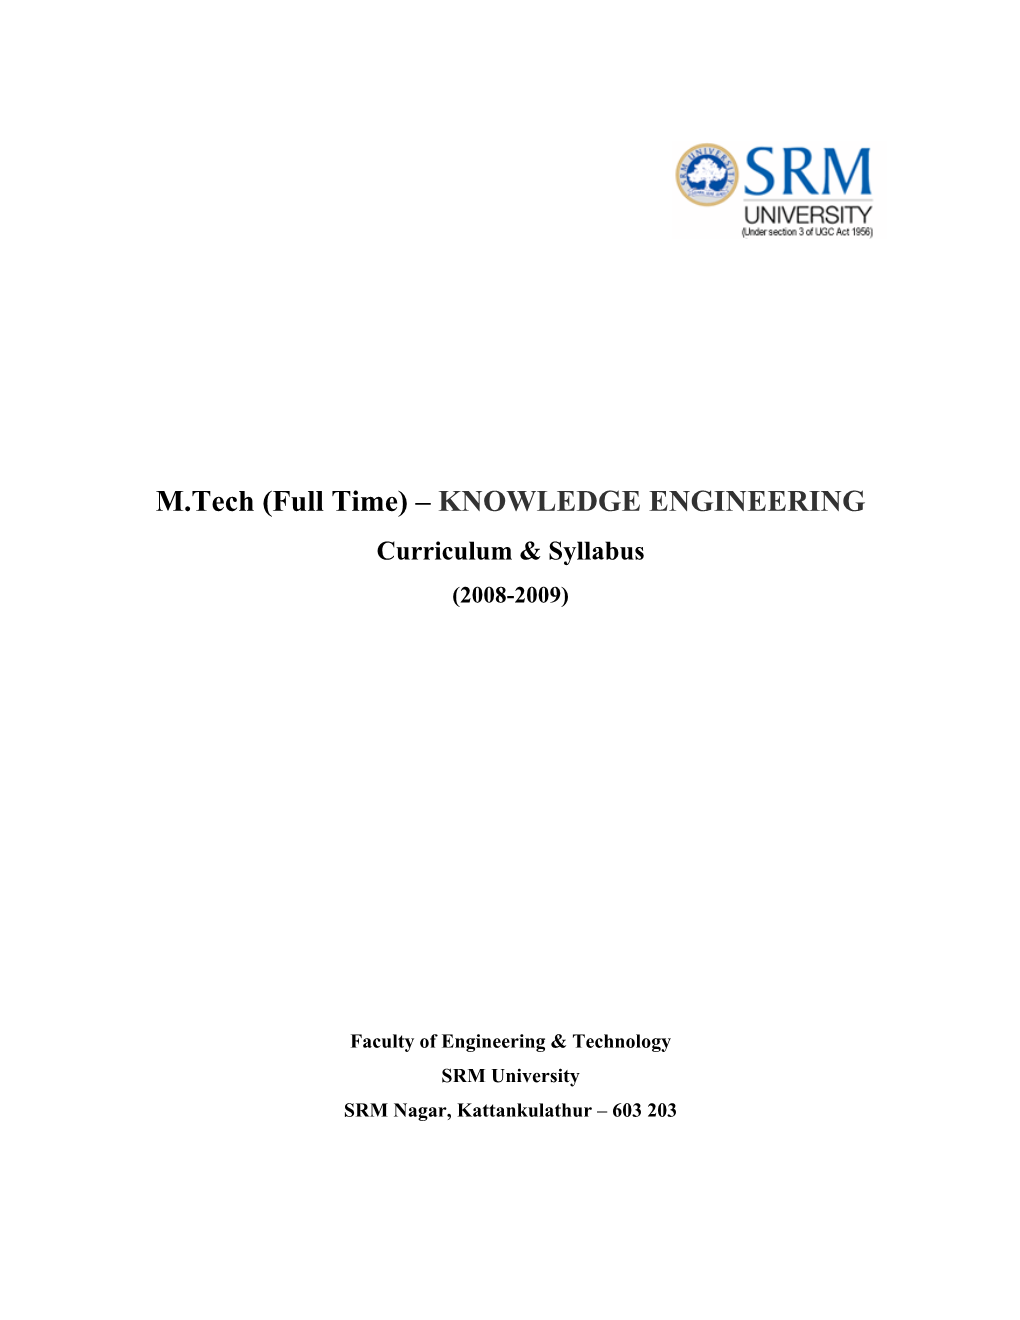 M.Tech (Full Time) – KNOWLEDGE ENGINEERING Curriculum & Syllabus (2008-2009)